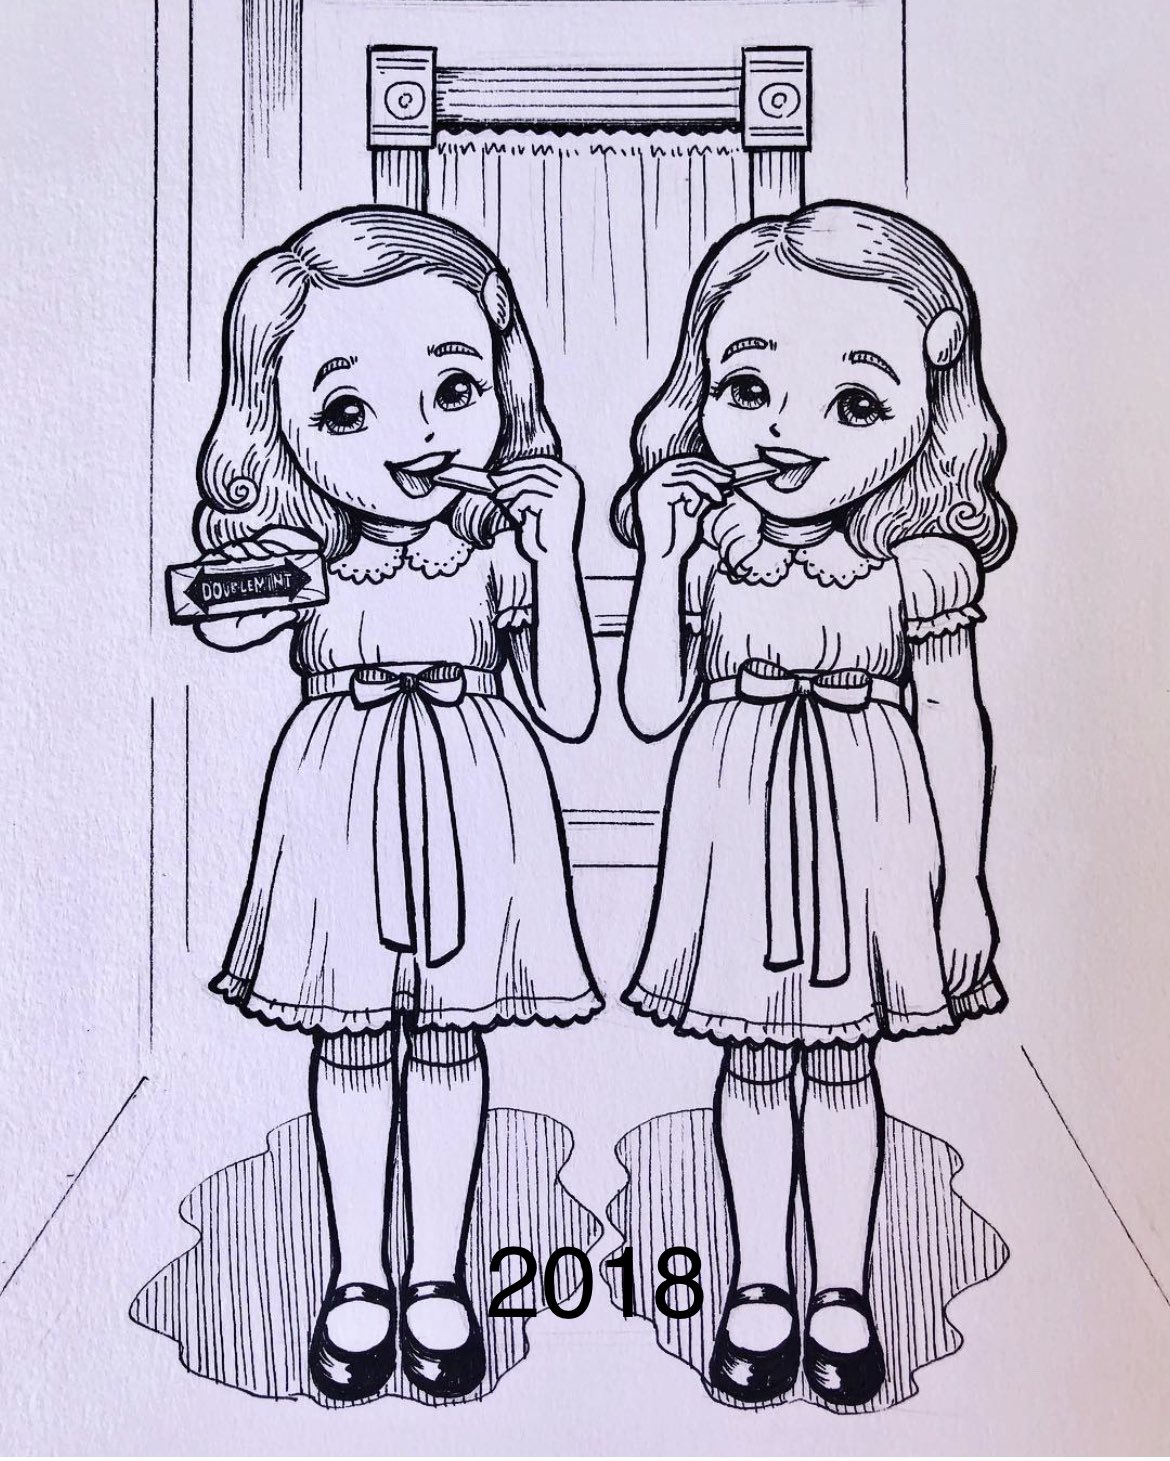 Nay naoko mullally on x day the shining twins from camilladerrico s drawlloween prompt list camillasdrawlloween inktober inktober kuretake kuretakeinktober kuretakeinktober inking shining theshiningtwins httpstco